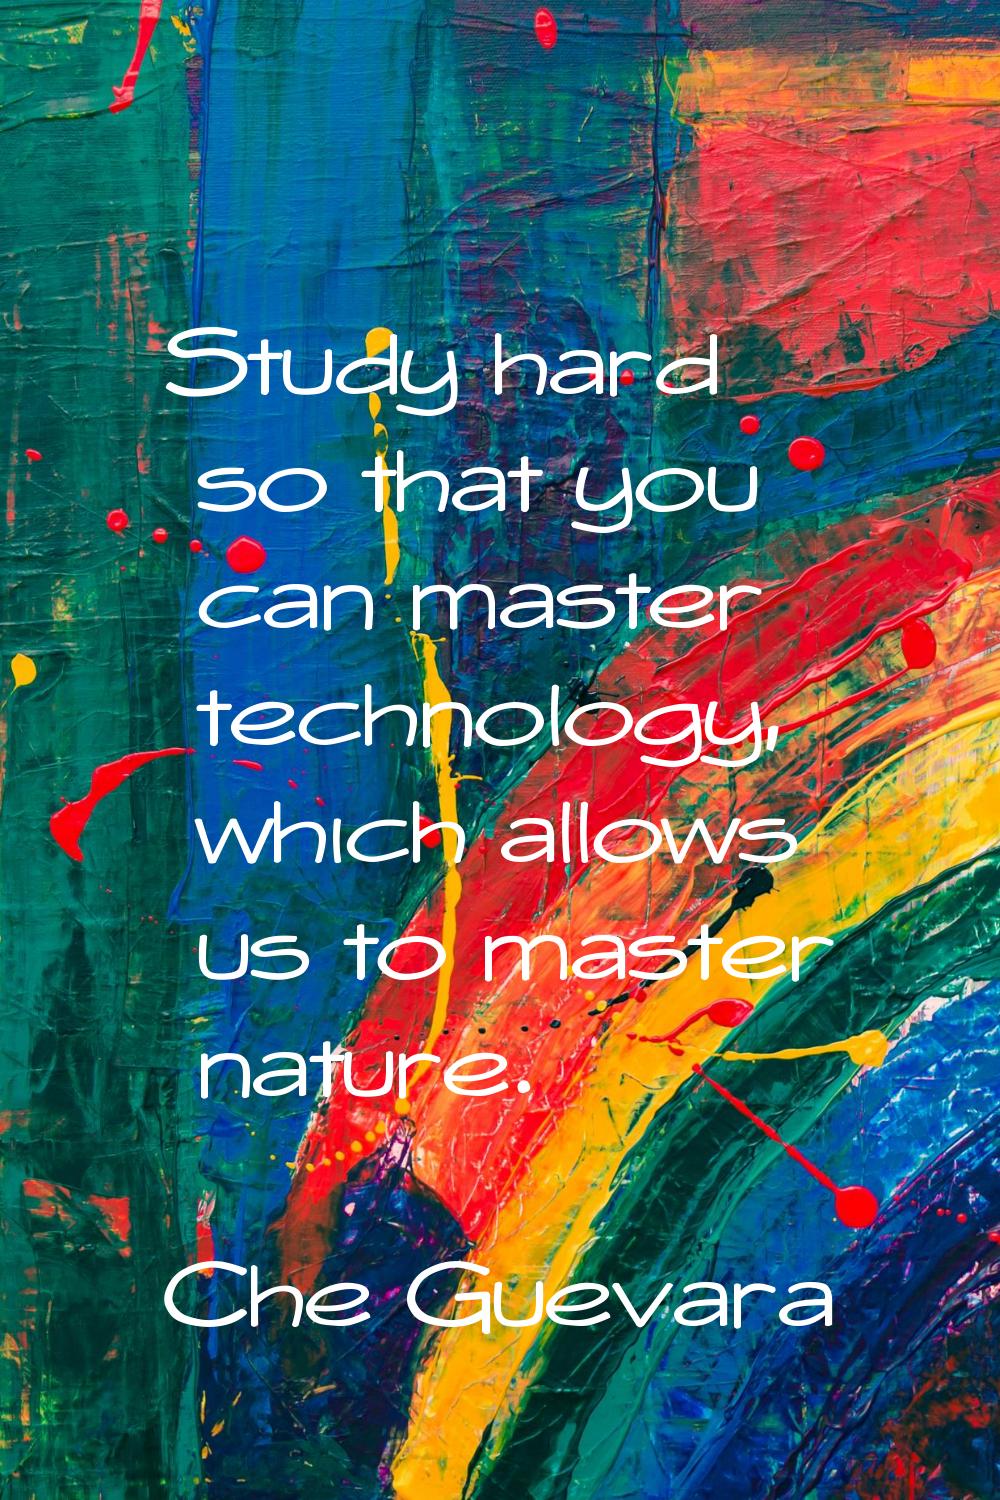 Study hard so that you can master technology, which allows us to master nature.